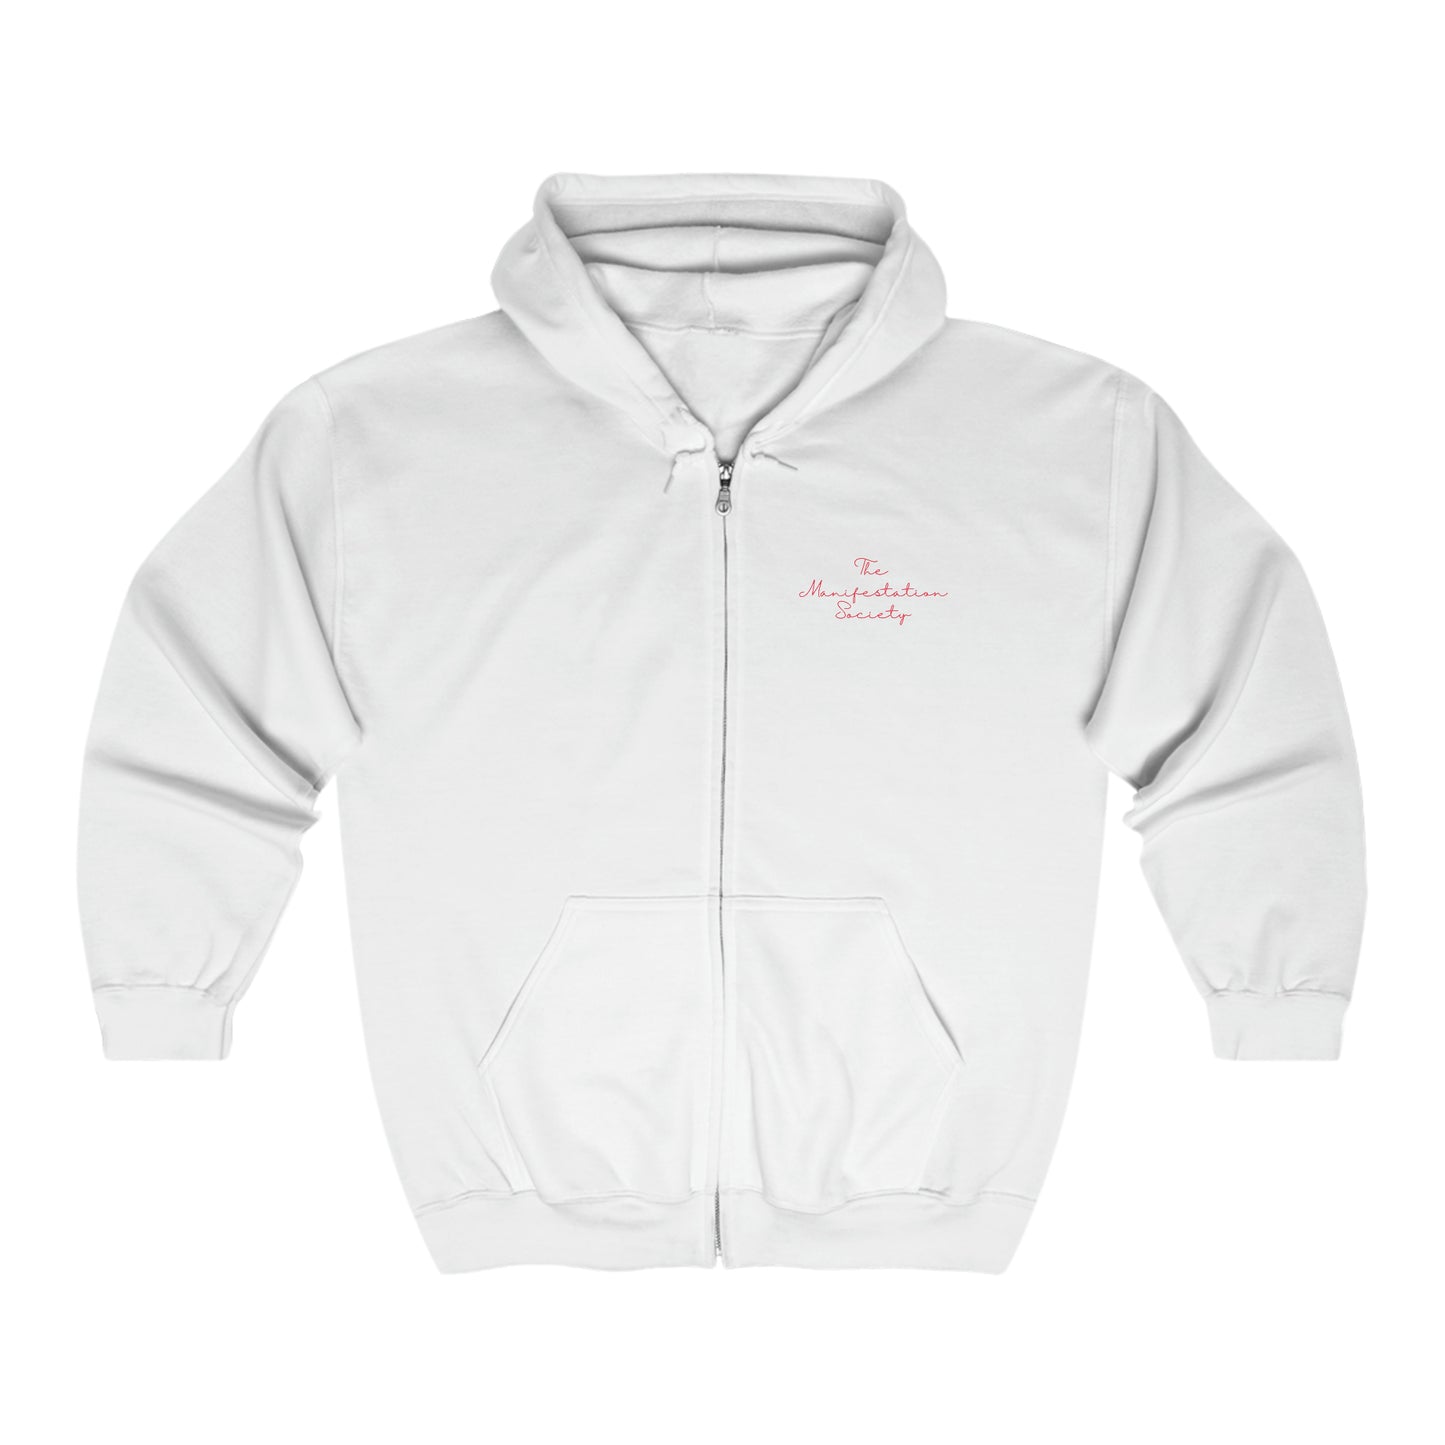 Zip-up Hoodie Jacket by The Manifestation Society